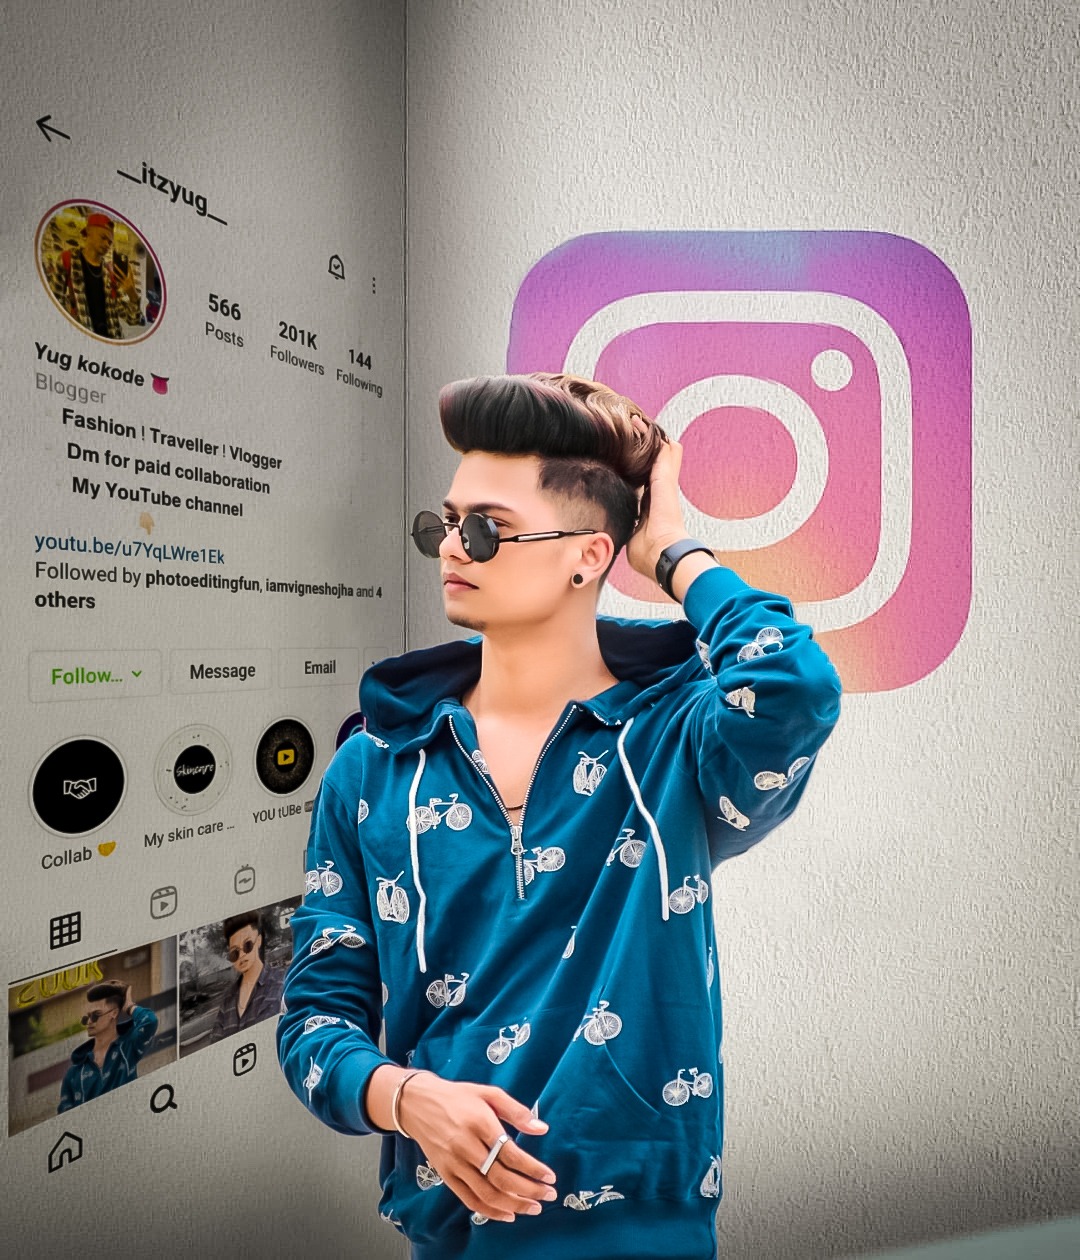 Instagram Profile Wall Photo Editing Download Full HD Background And ...